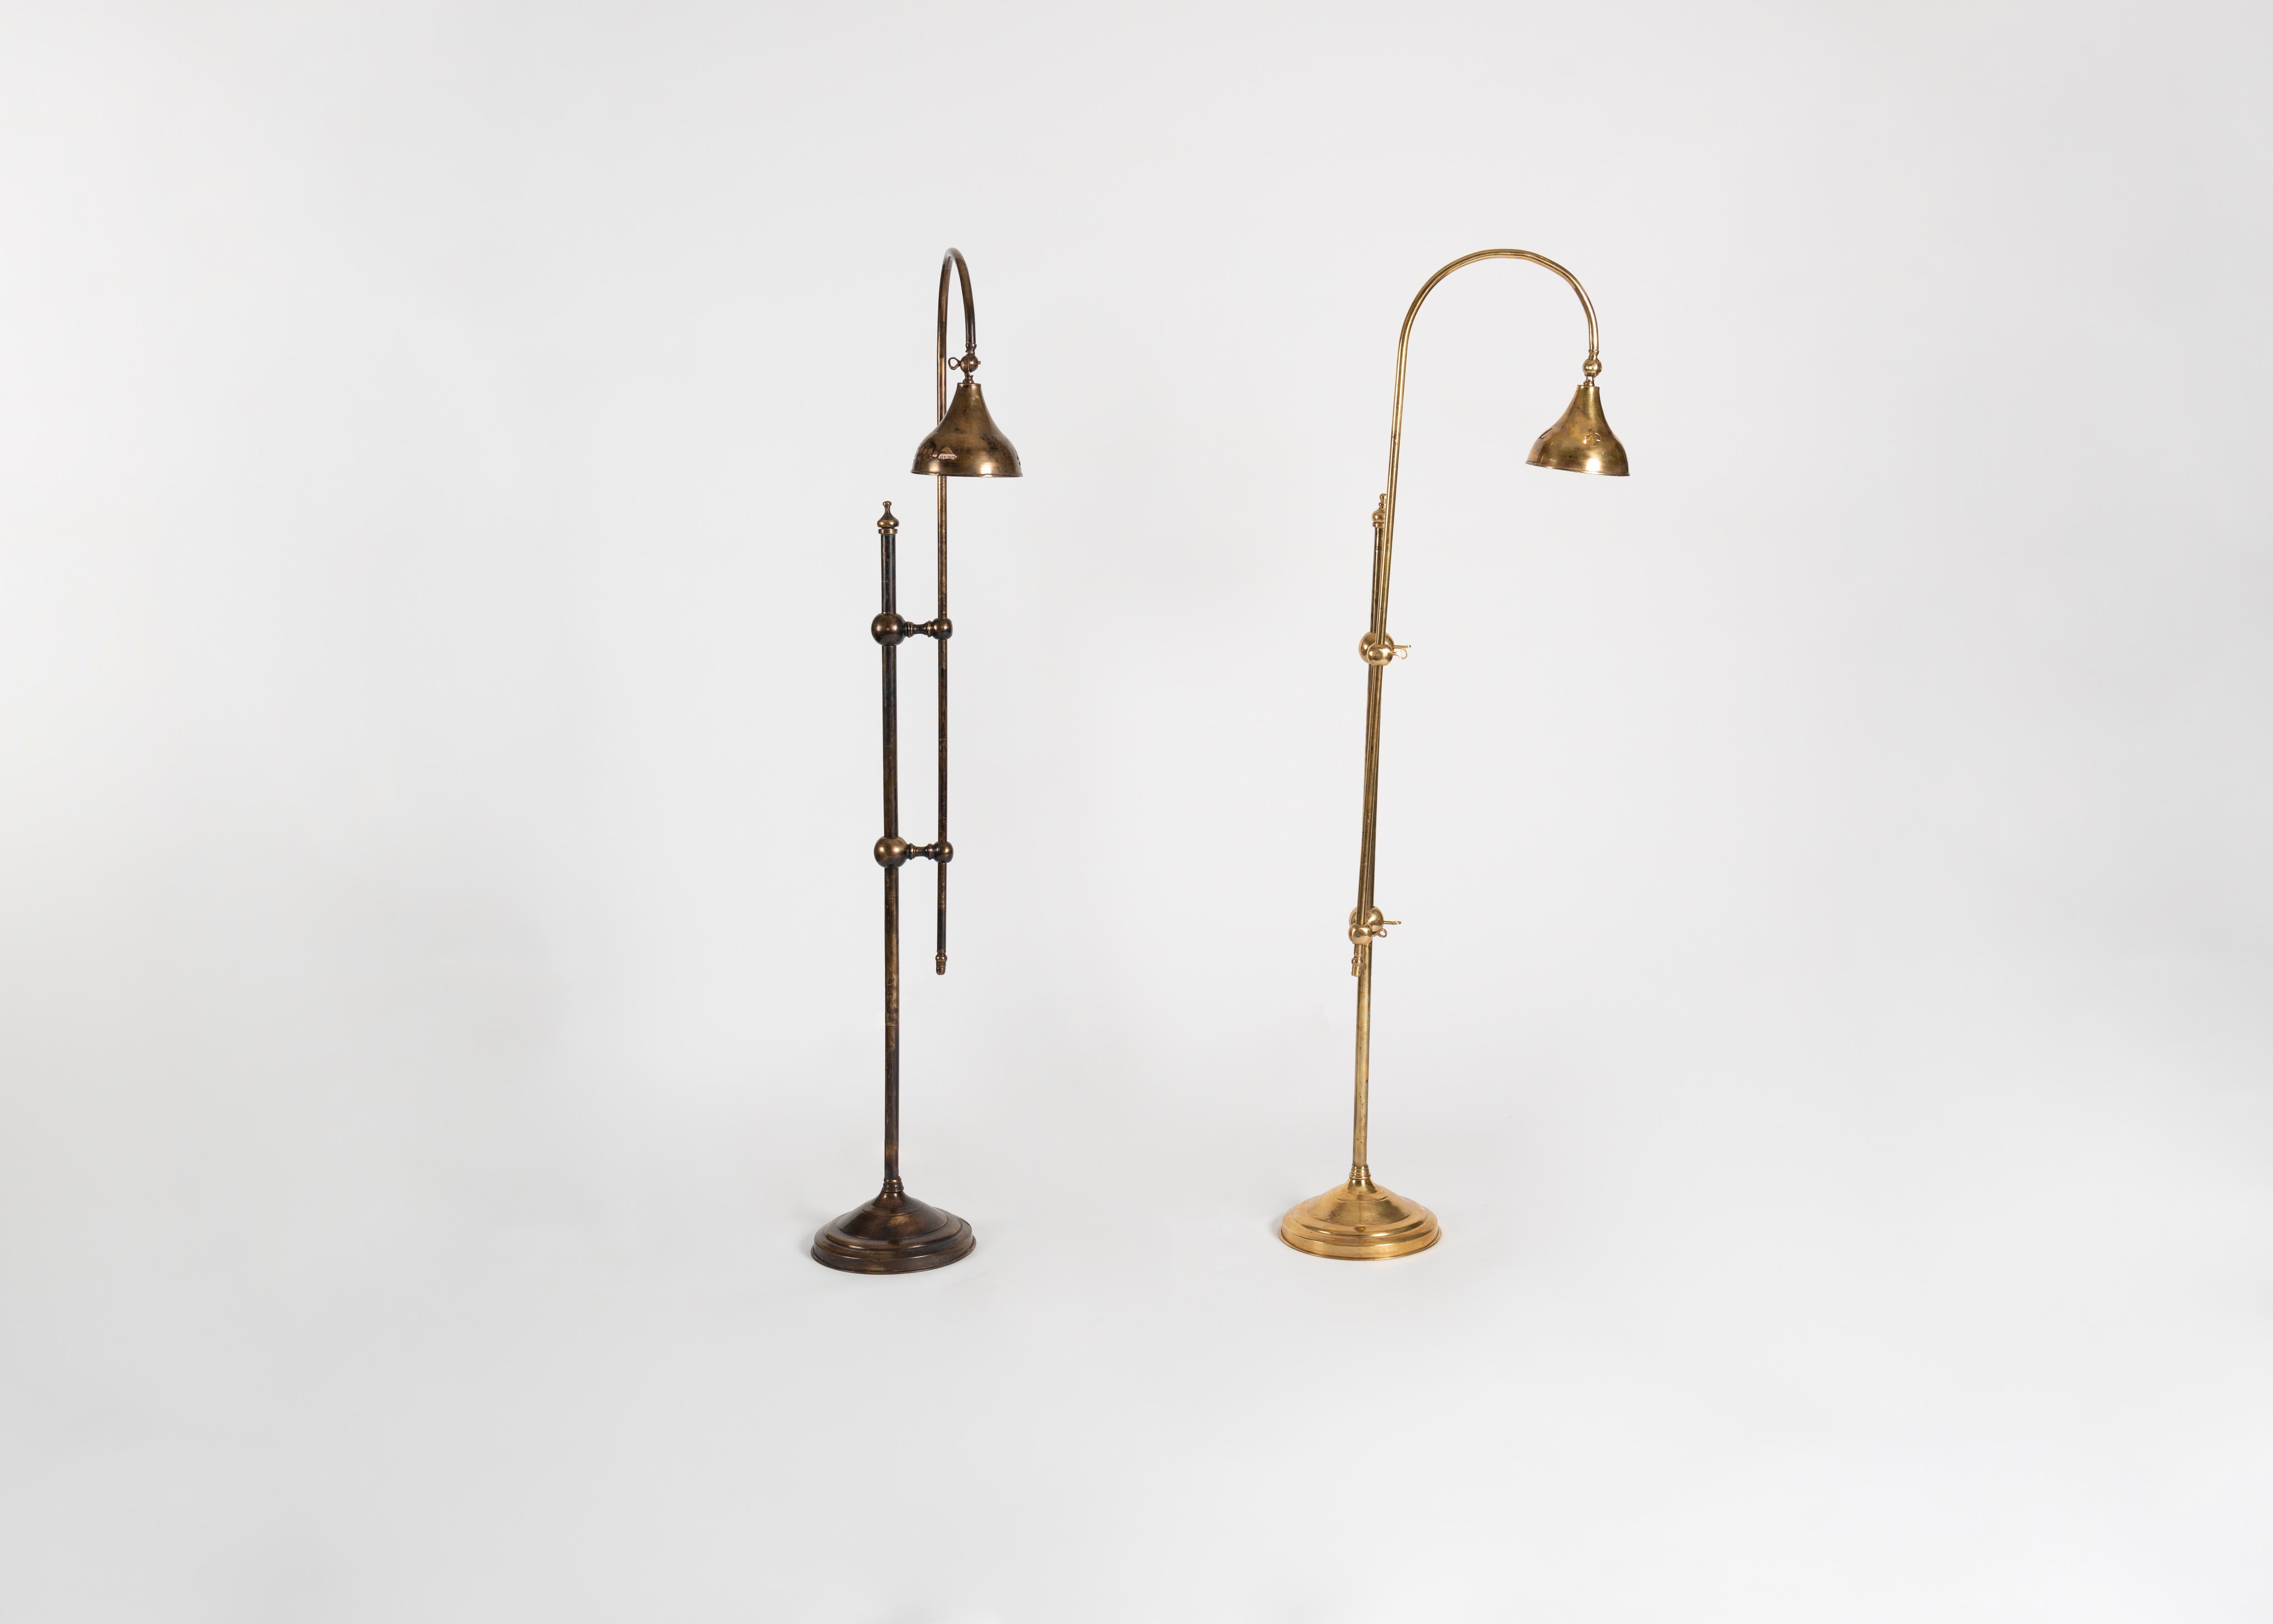 Bill Willis, Matched Pair of Articulated Floor Lamps, Morocco, Late 20th Century In Good Condition For Sale In New York, NY